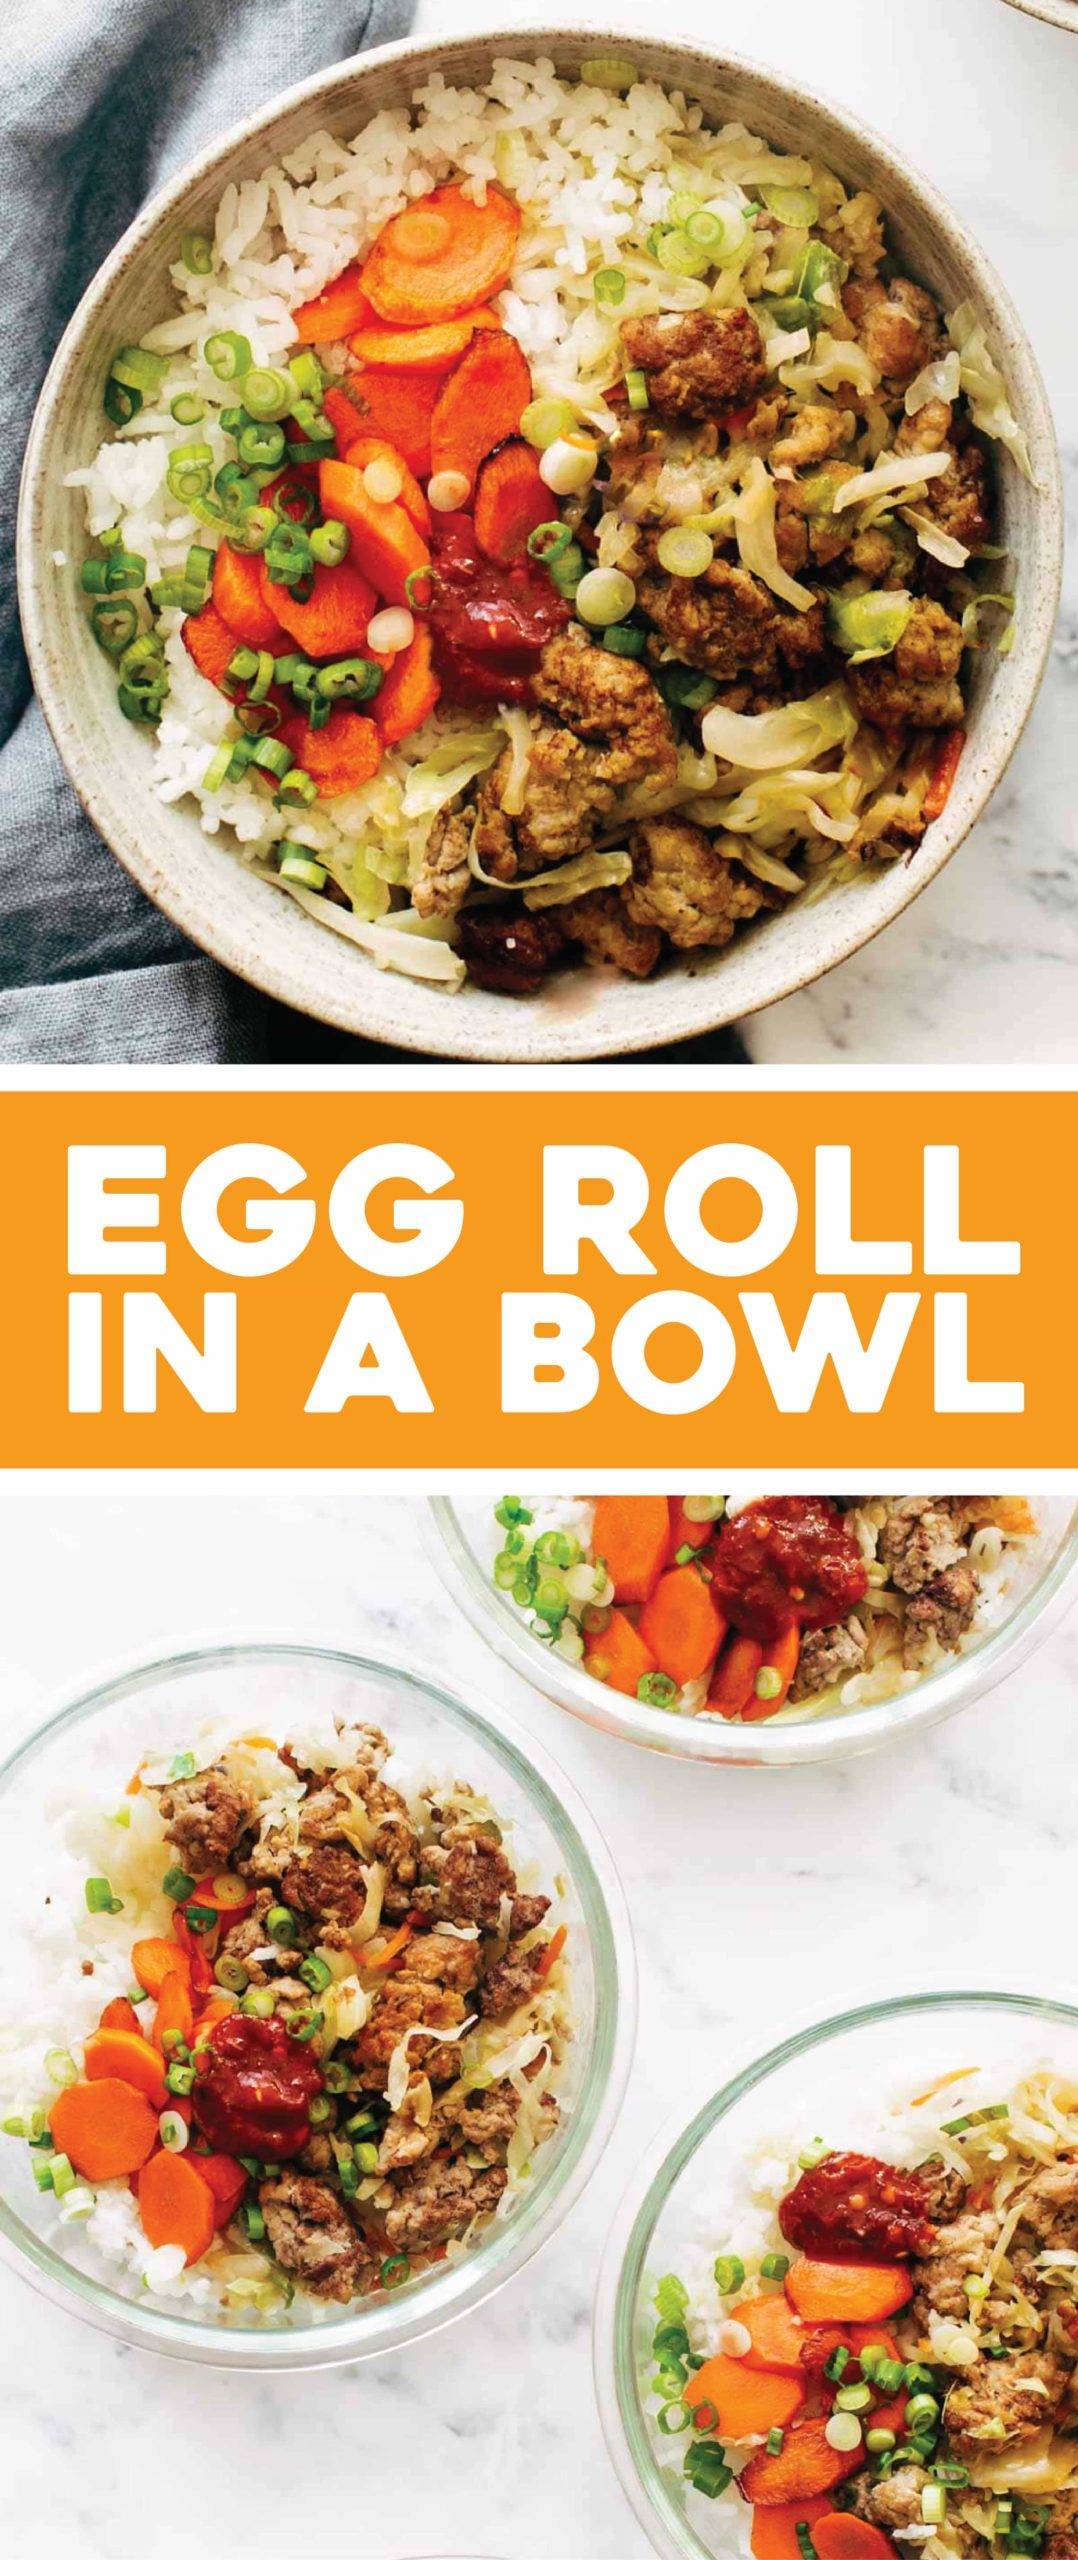 15-Minute Egg Roll in a Bowl Recipe - Pinch of Yum